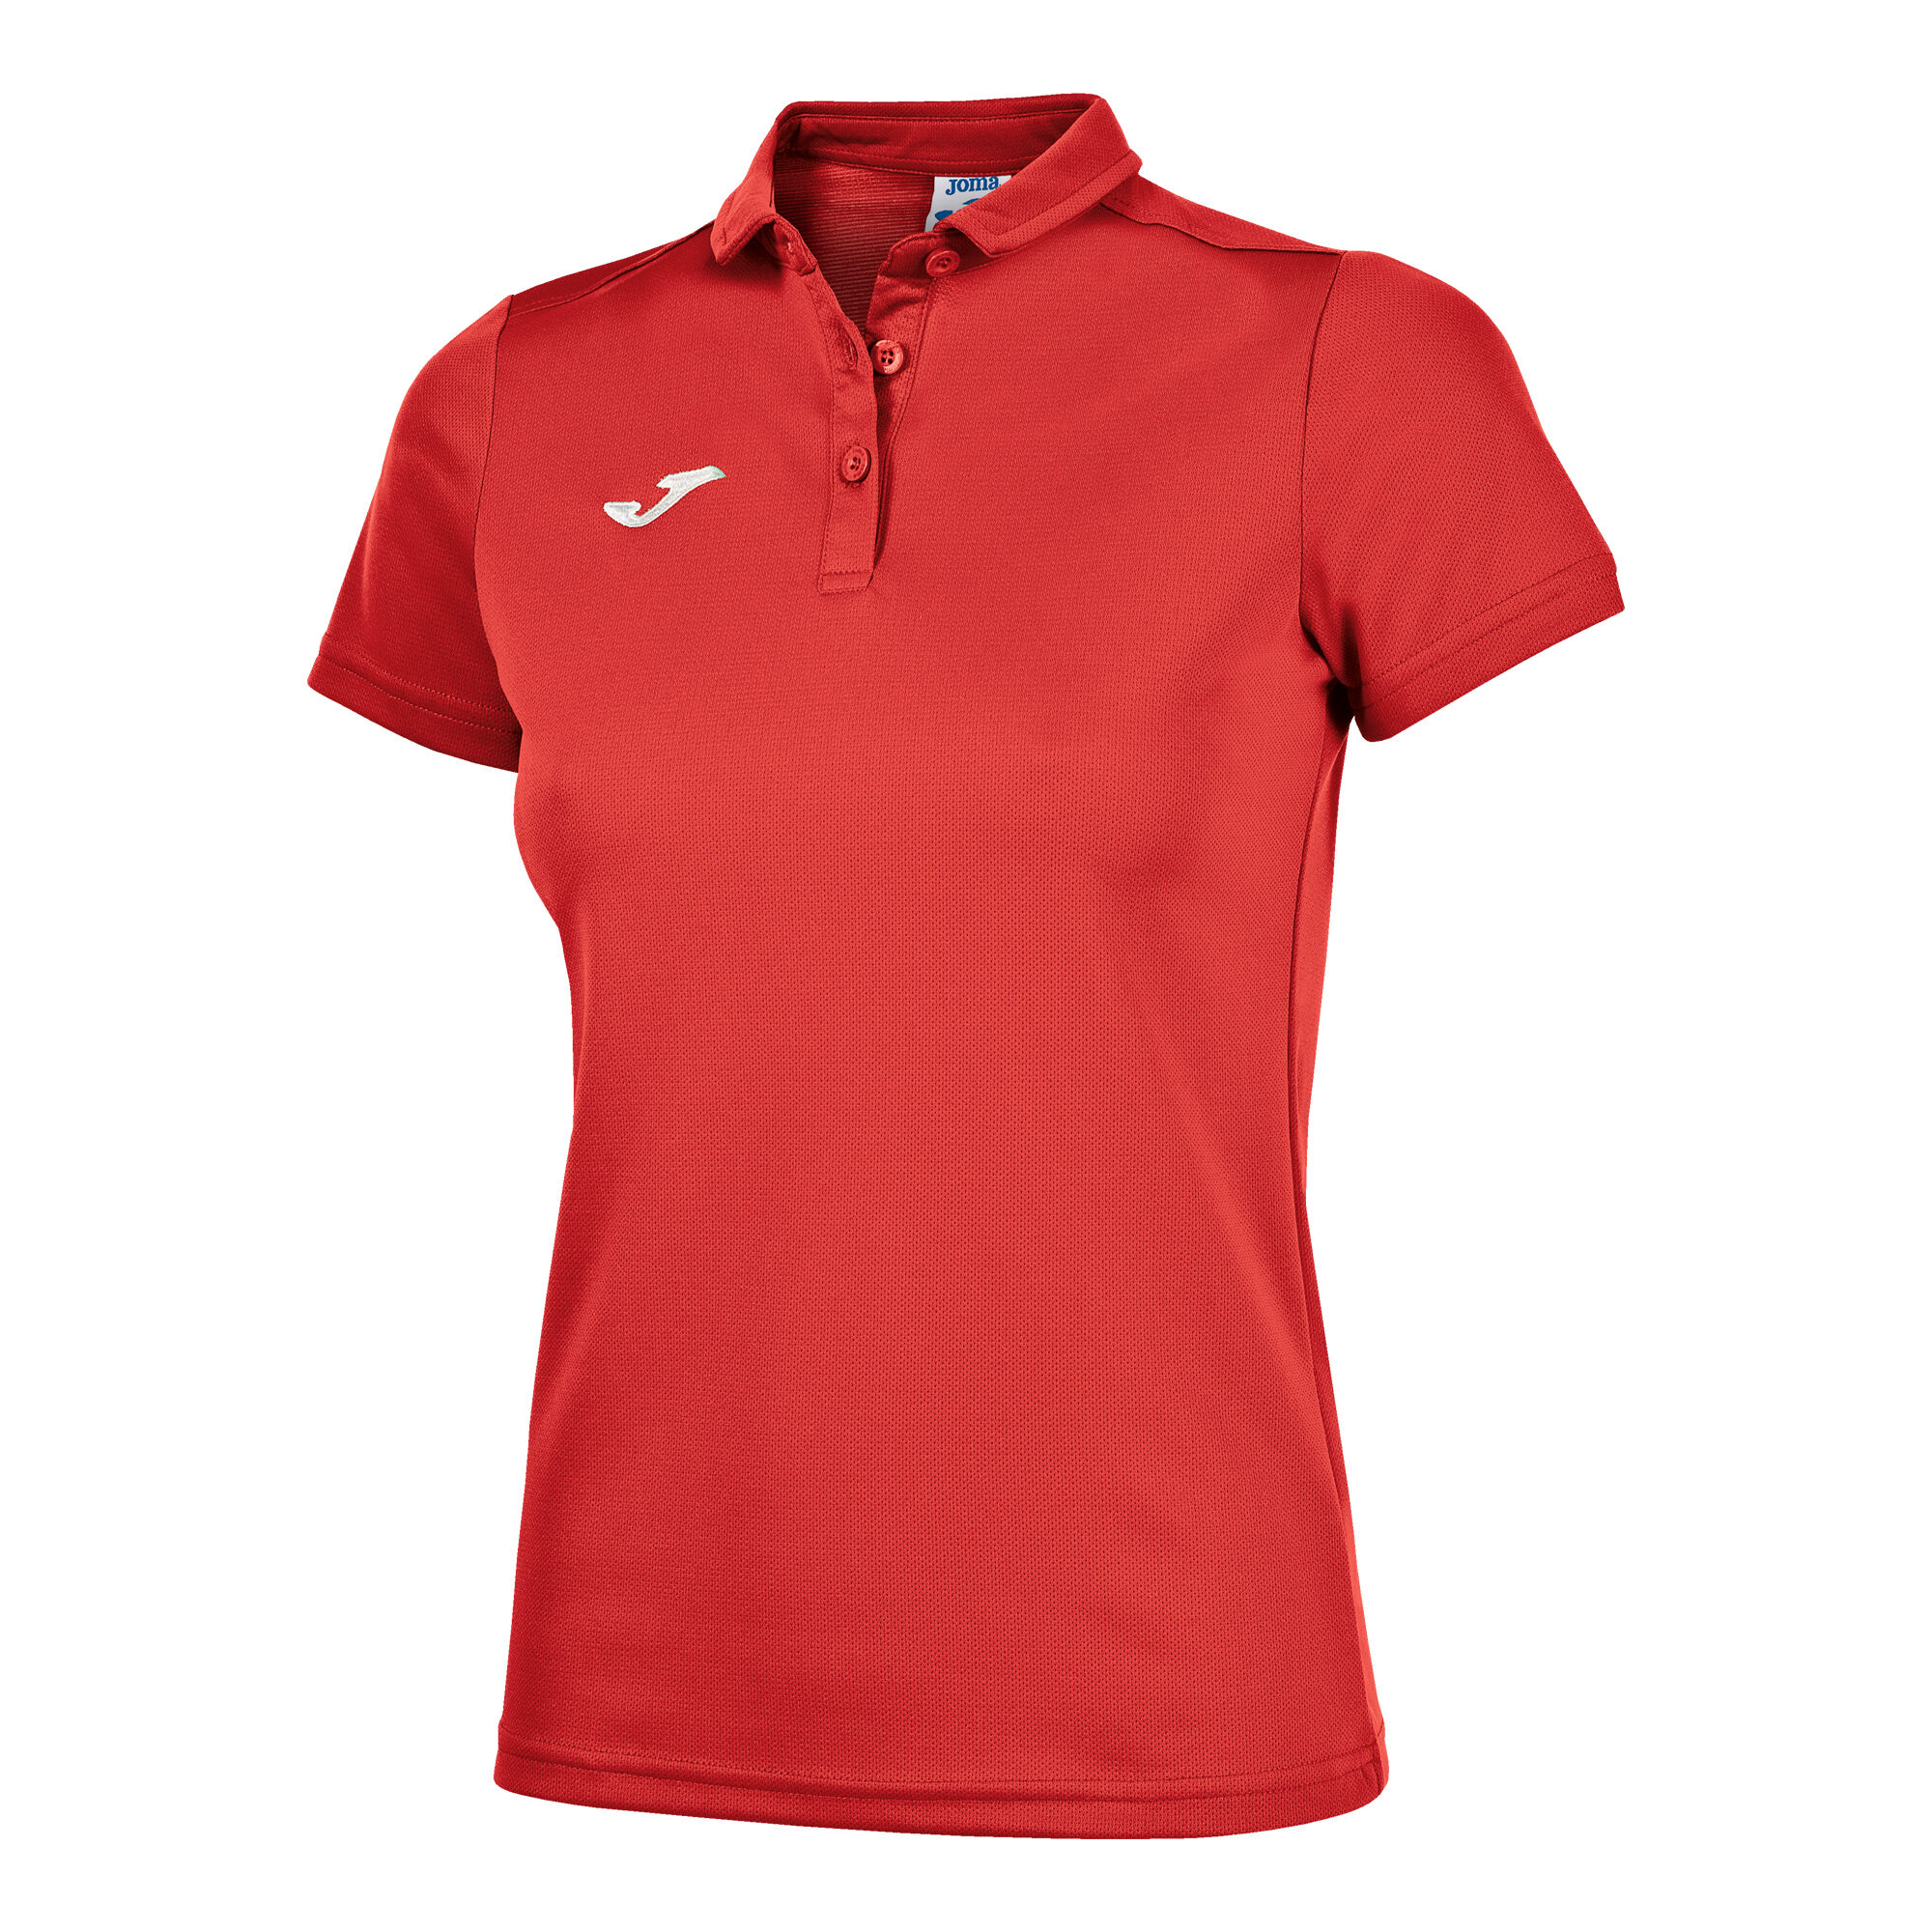 POLO MANCHES COURTES FEMME HOBBY ROUGE